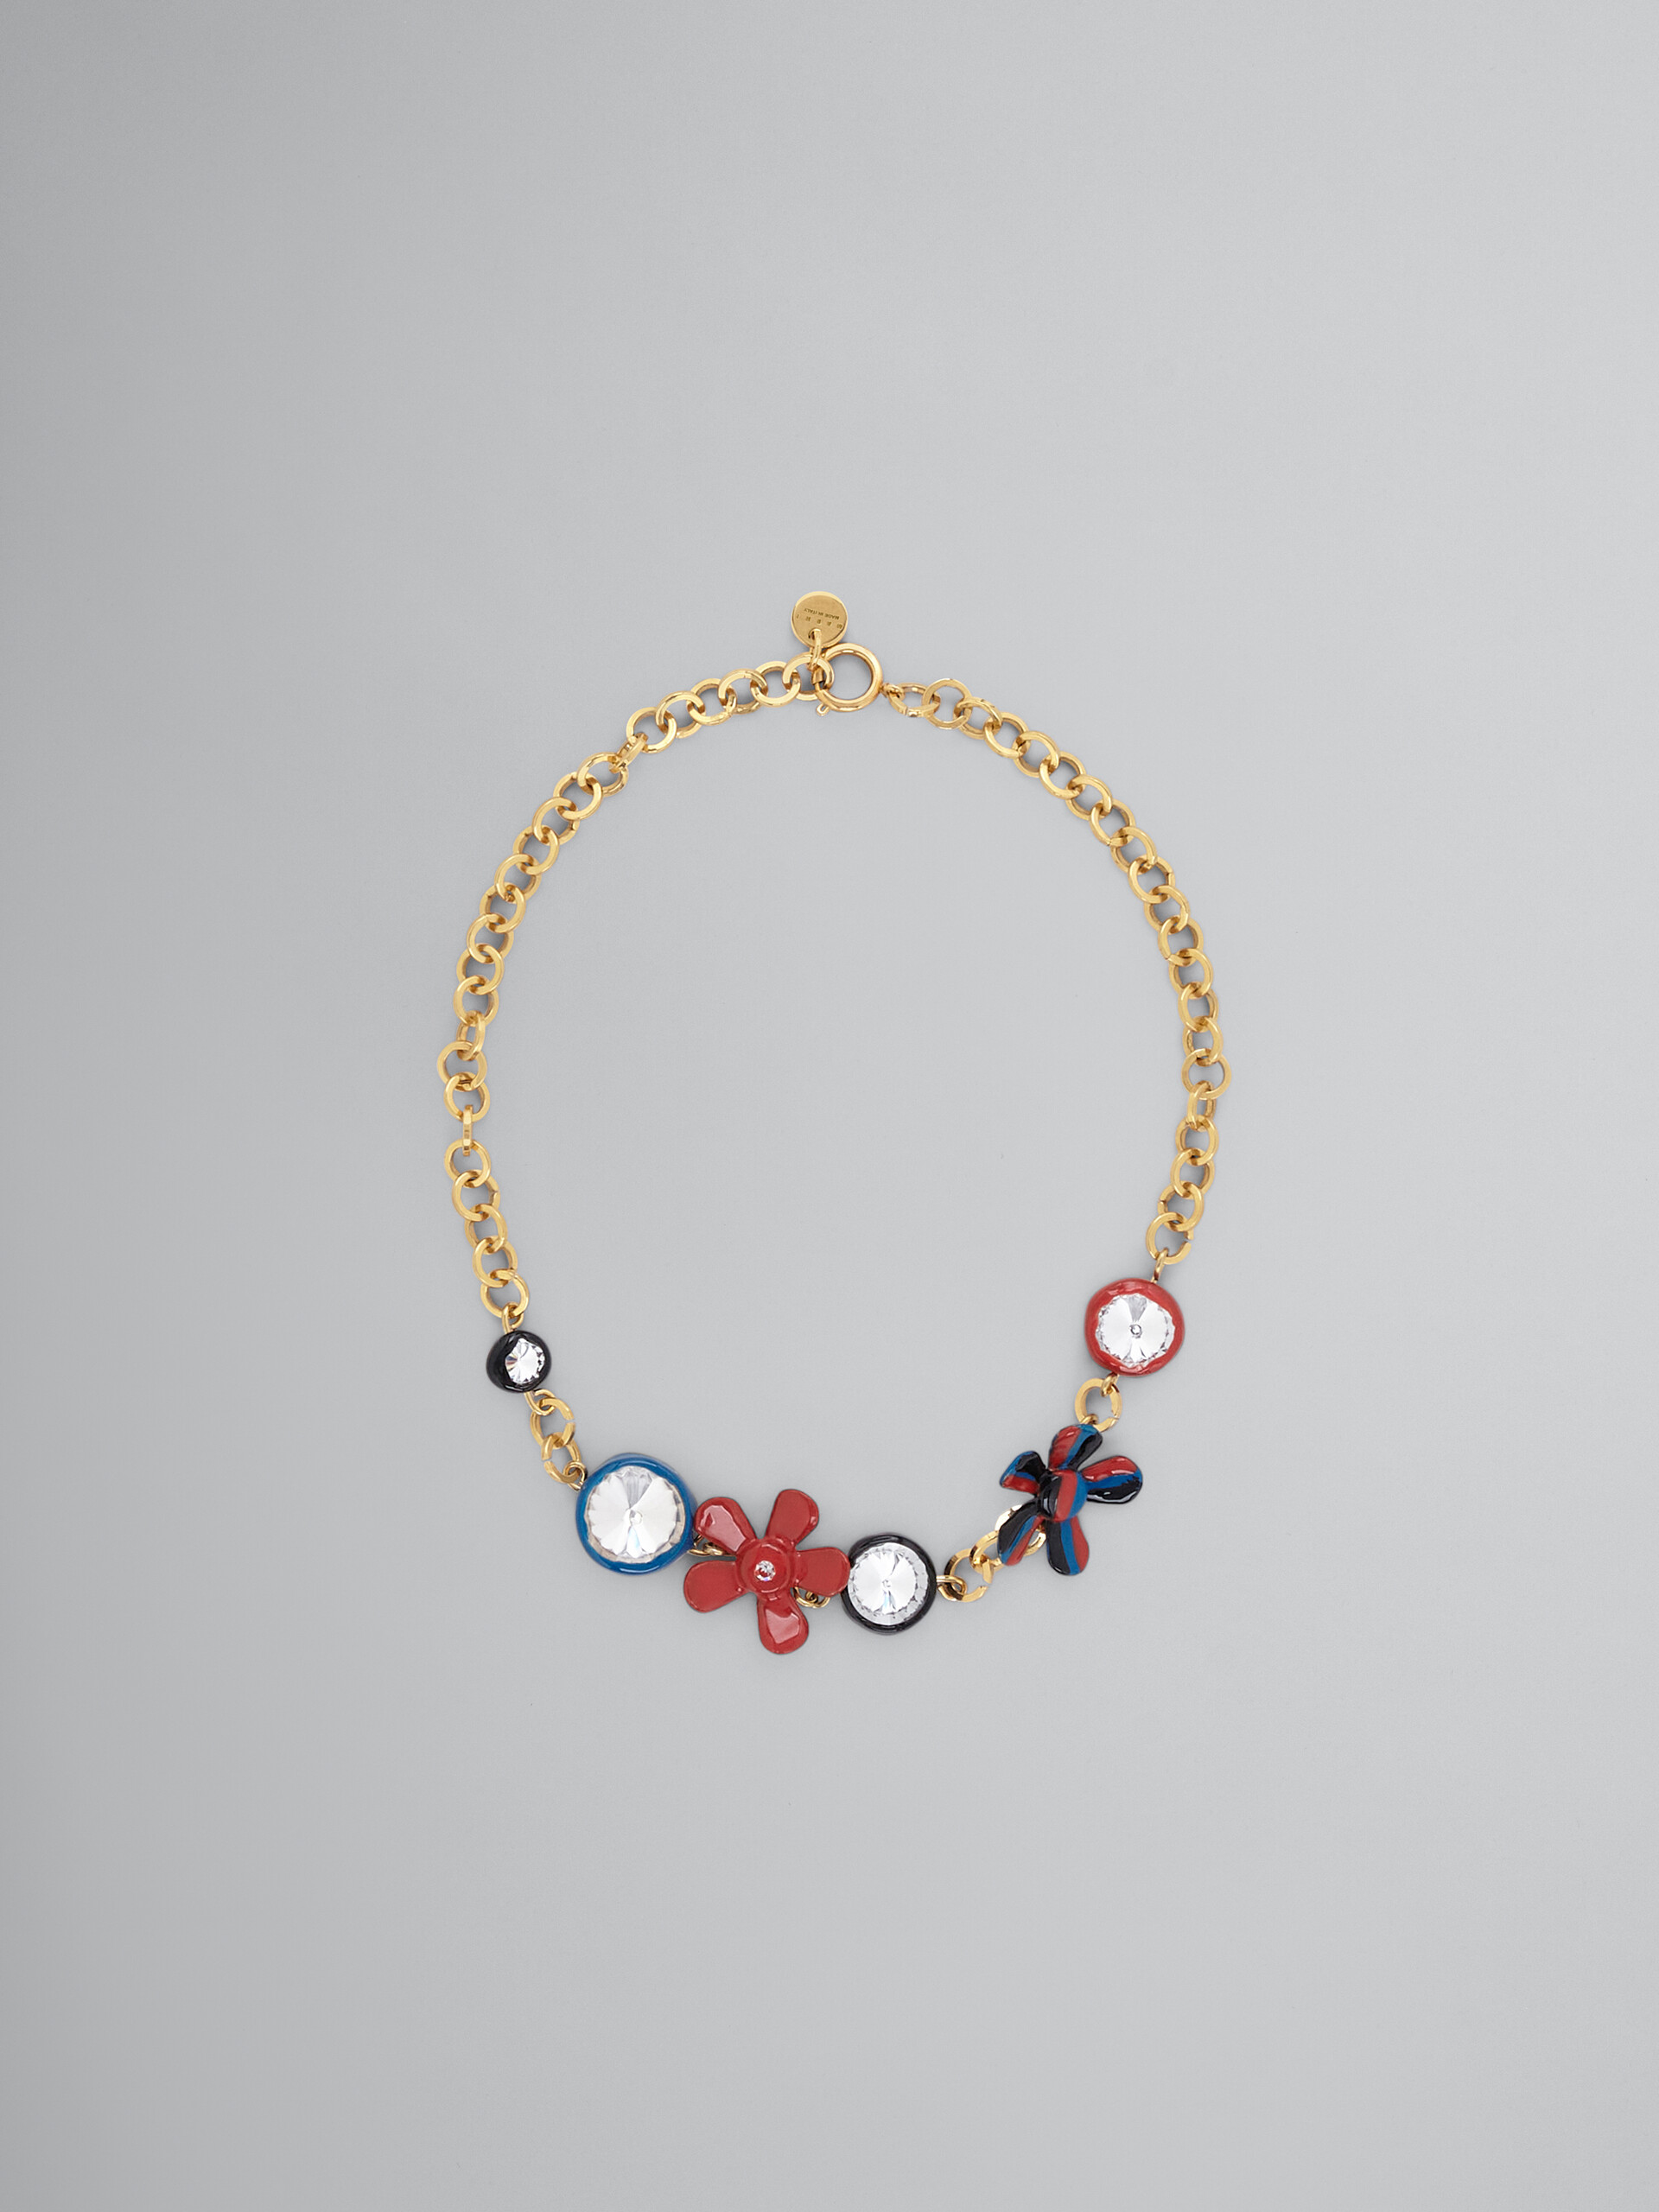 DAISY red and blue necklace - Necklaces - Image 1